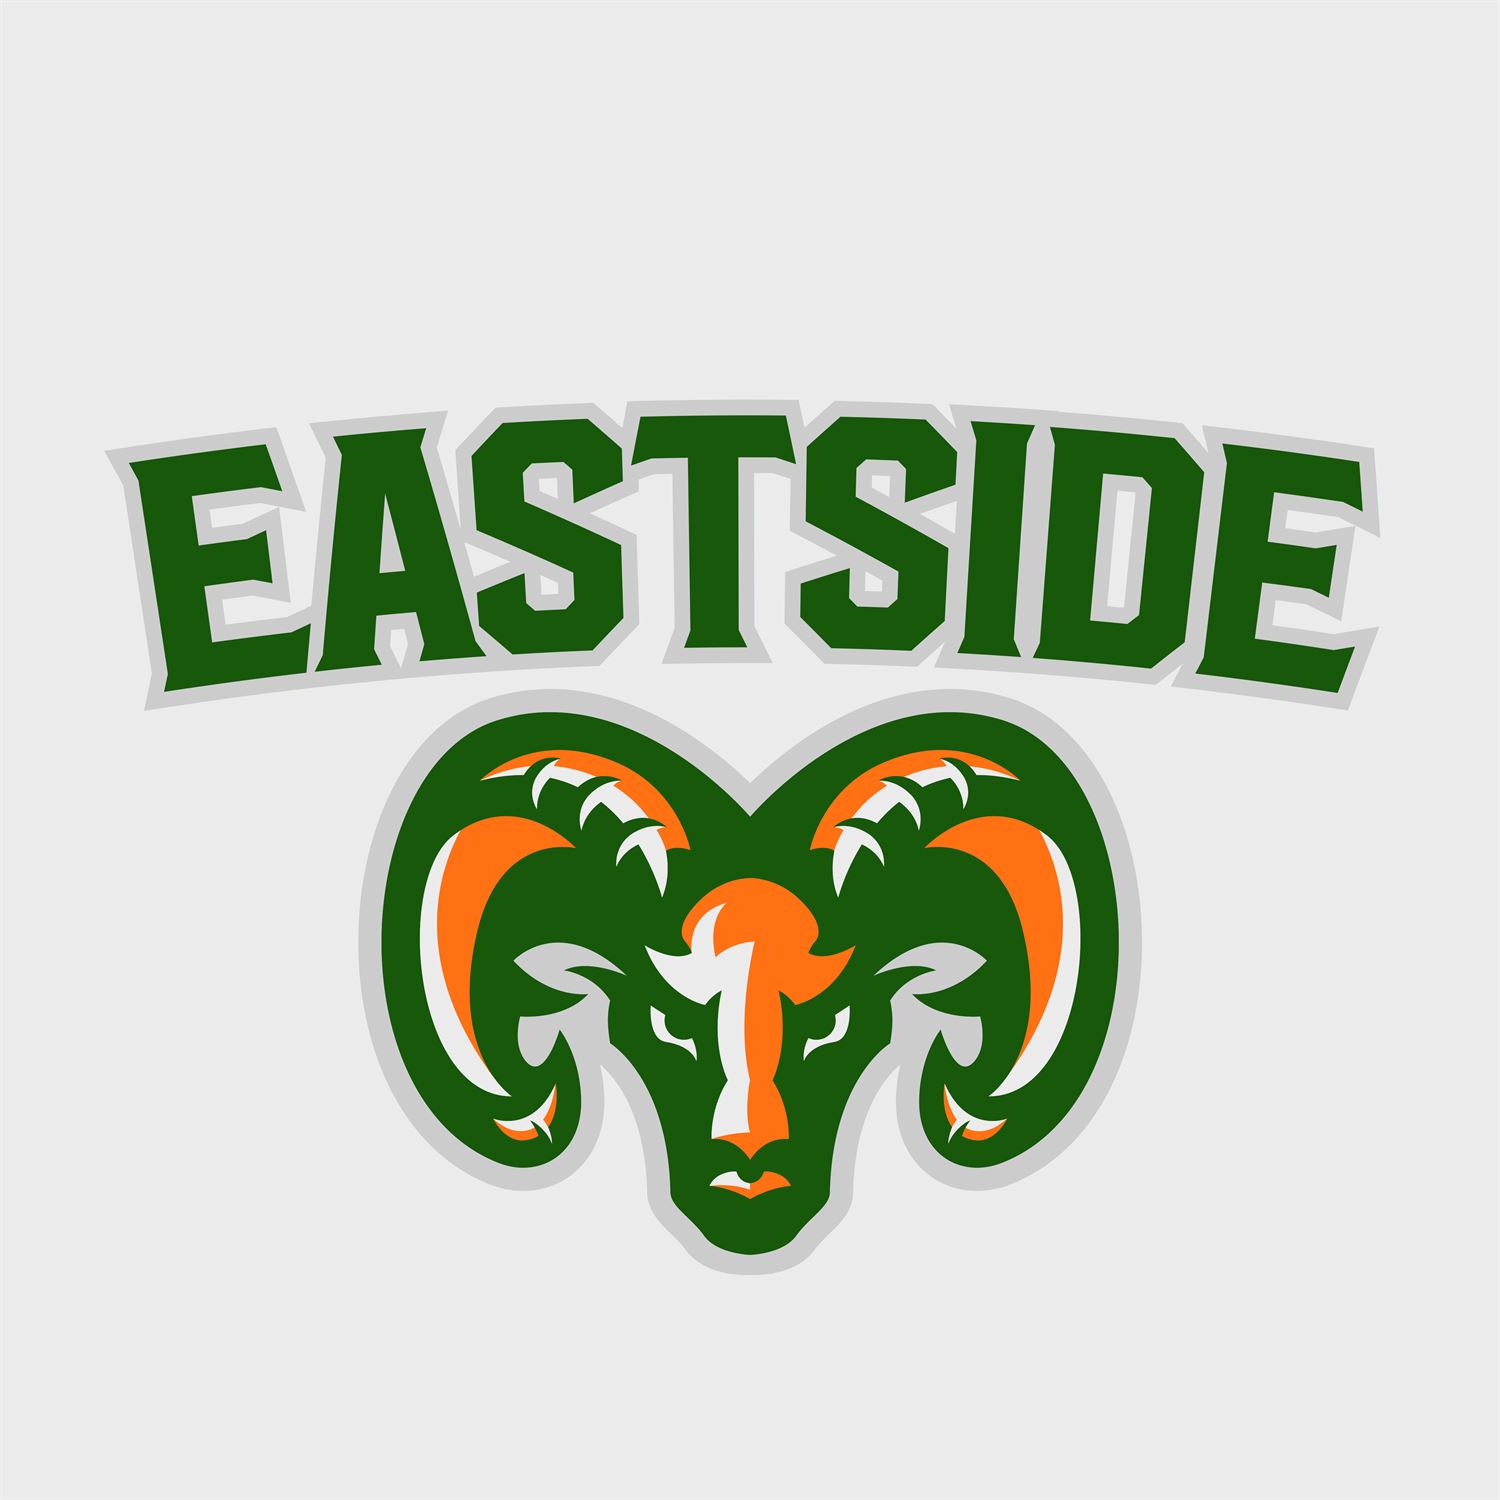 Eastside Football suffers a 1 point loss to Bishop Moore as Gator Commit Anthony Richardson